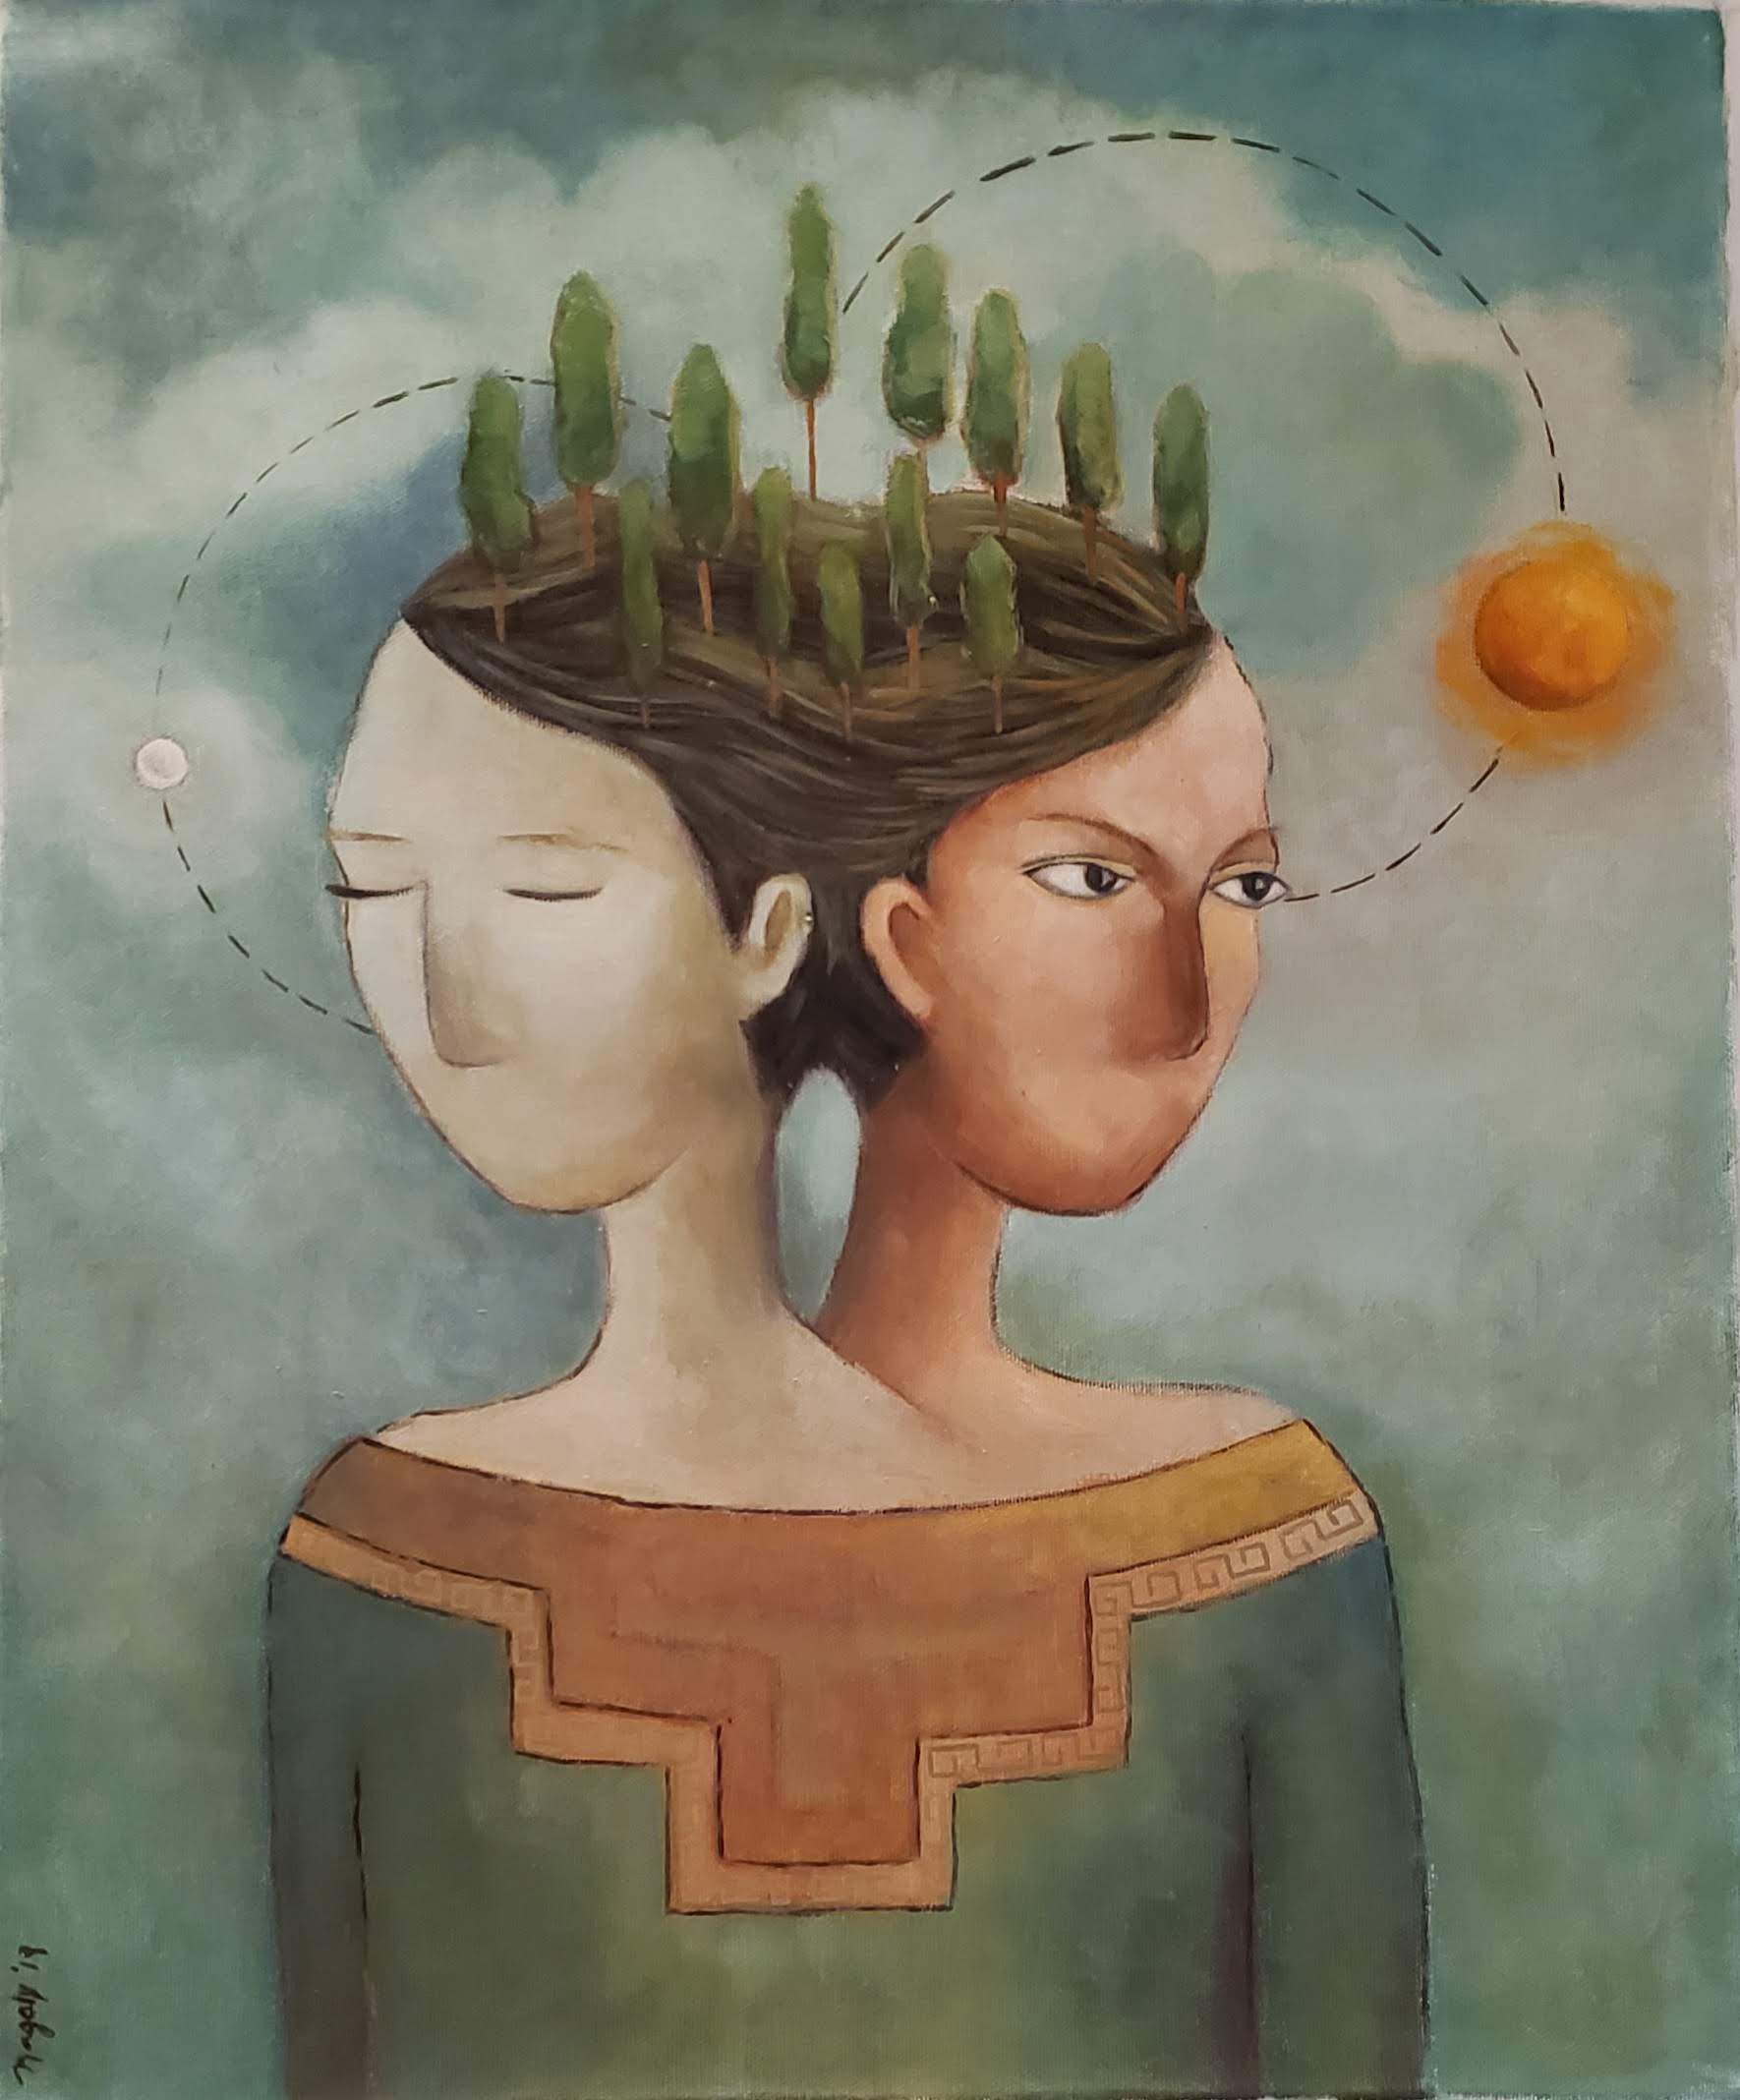 "Duality" Painting by Magaly Paredes Alcalá.